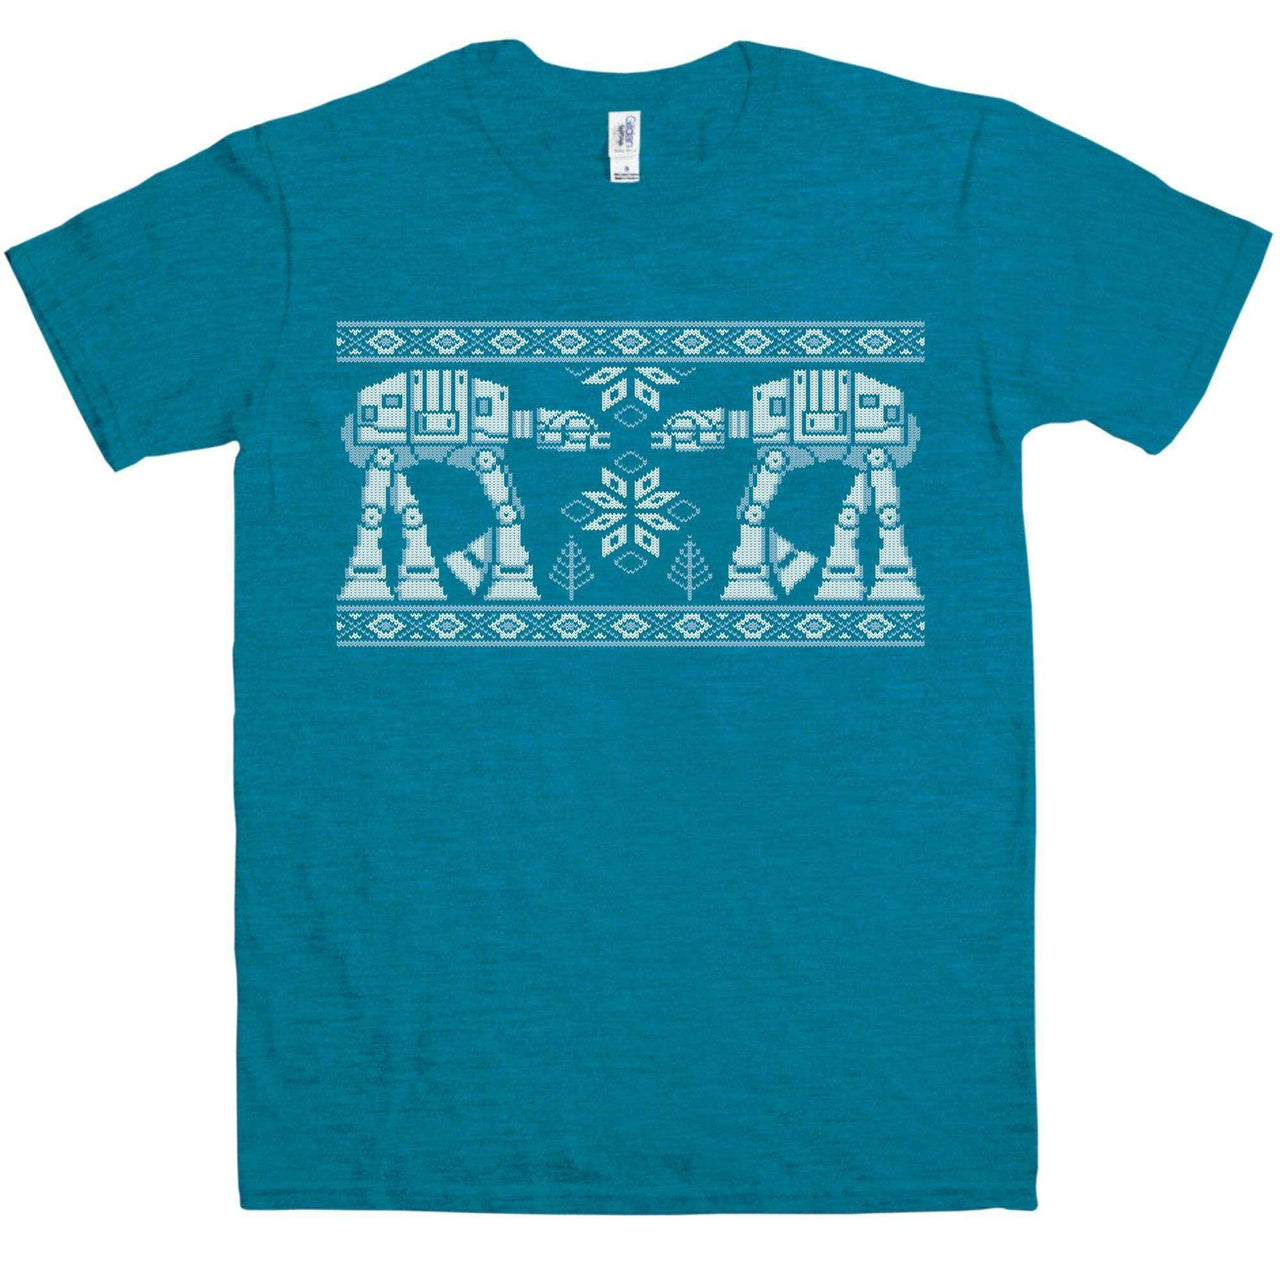 Knitted Jumper Style Snow Walkers T-Shirt For Men 8Ball